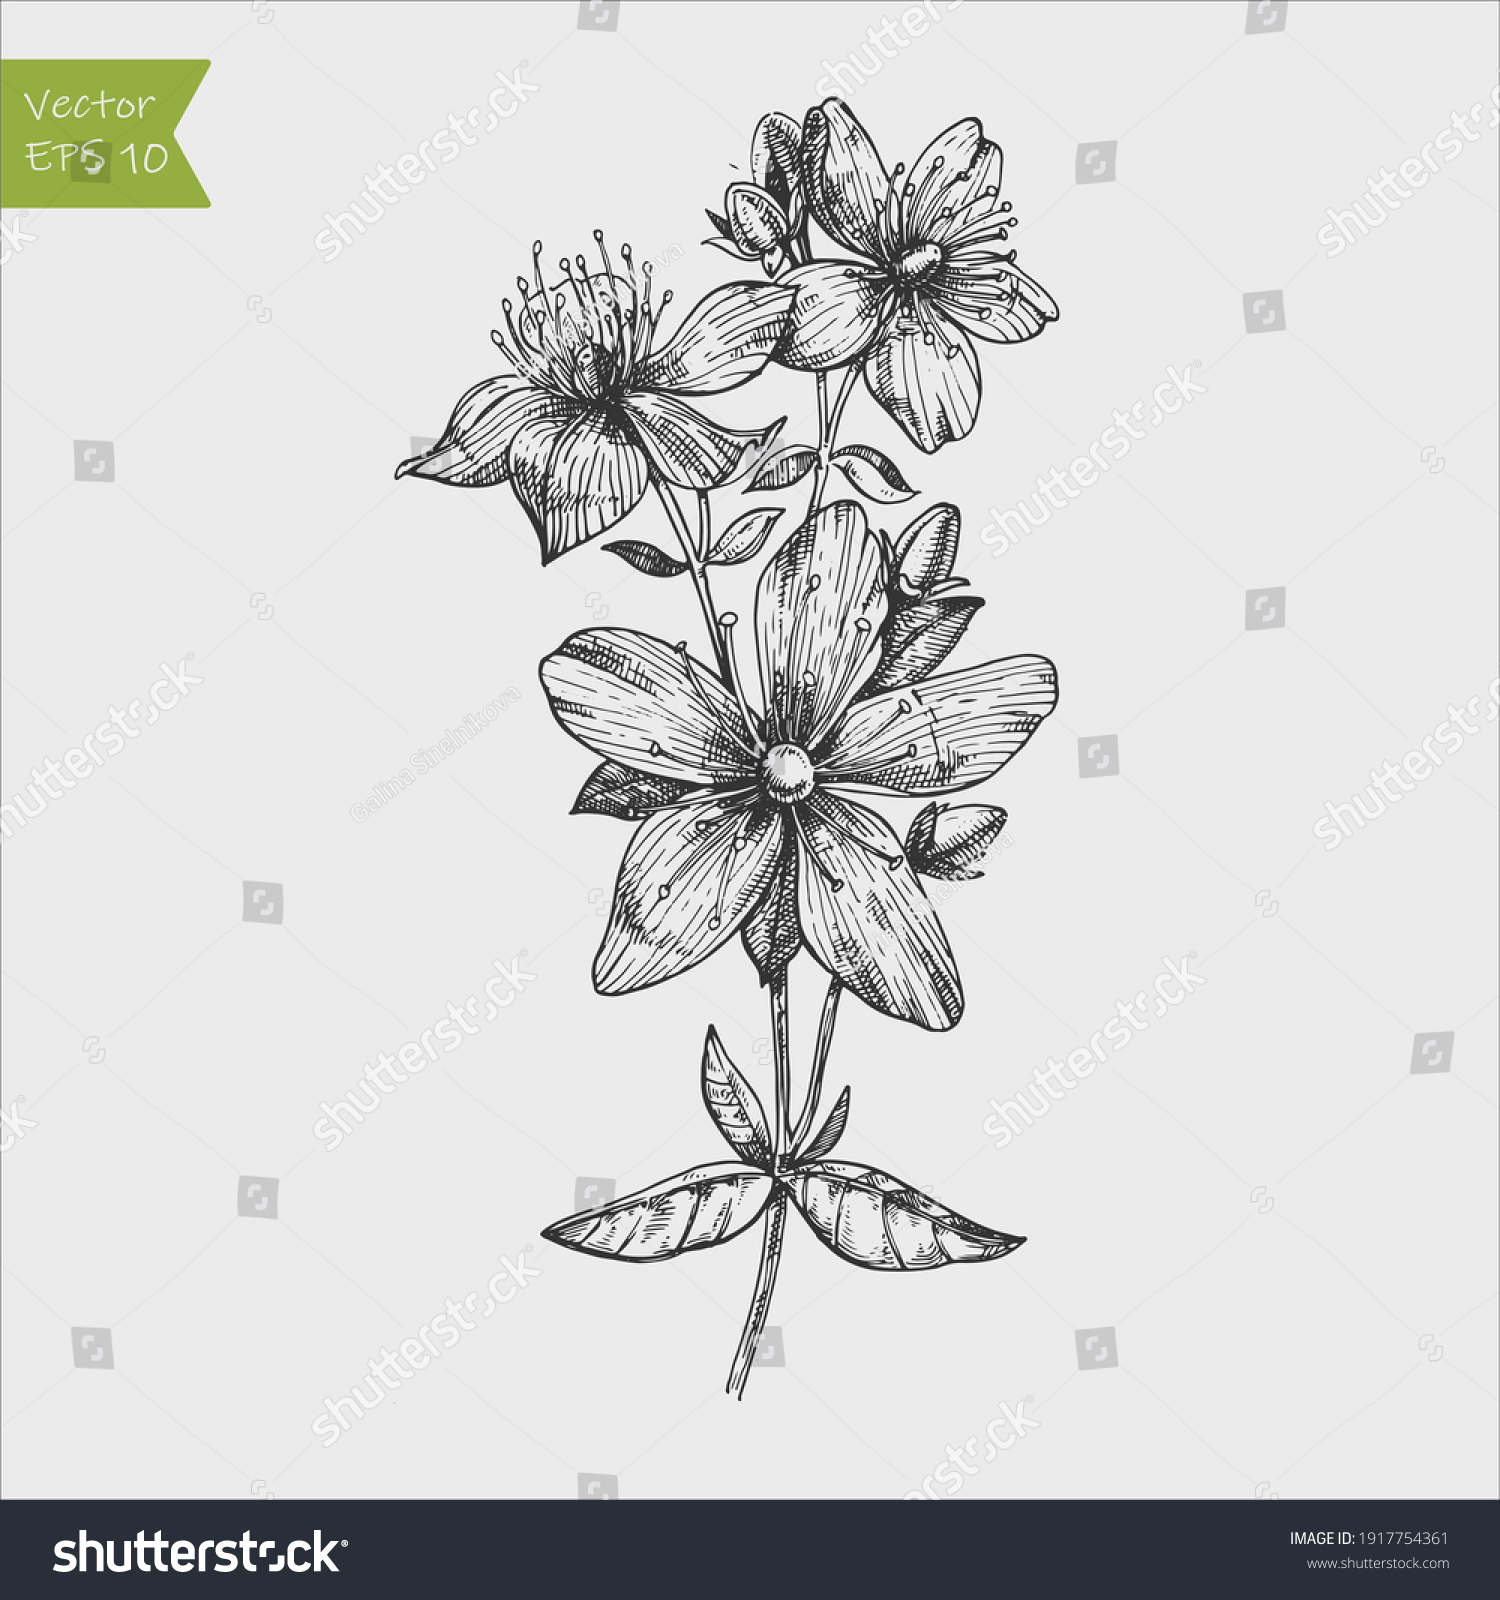 Tutsan plant background. Vector St. John's wort leaves and flowers illustration. Hand drawn Hypericum perforatum branch sketch. Officinalis, medicinal, cosmetic herb logo. #1917754361